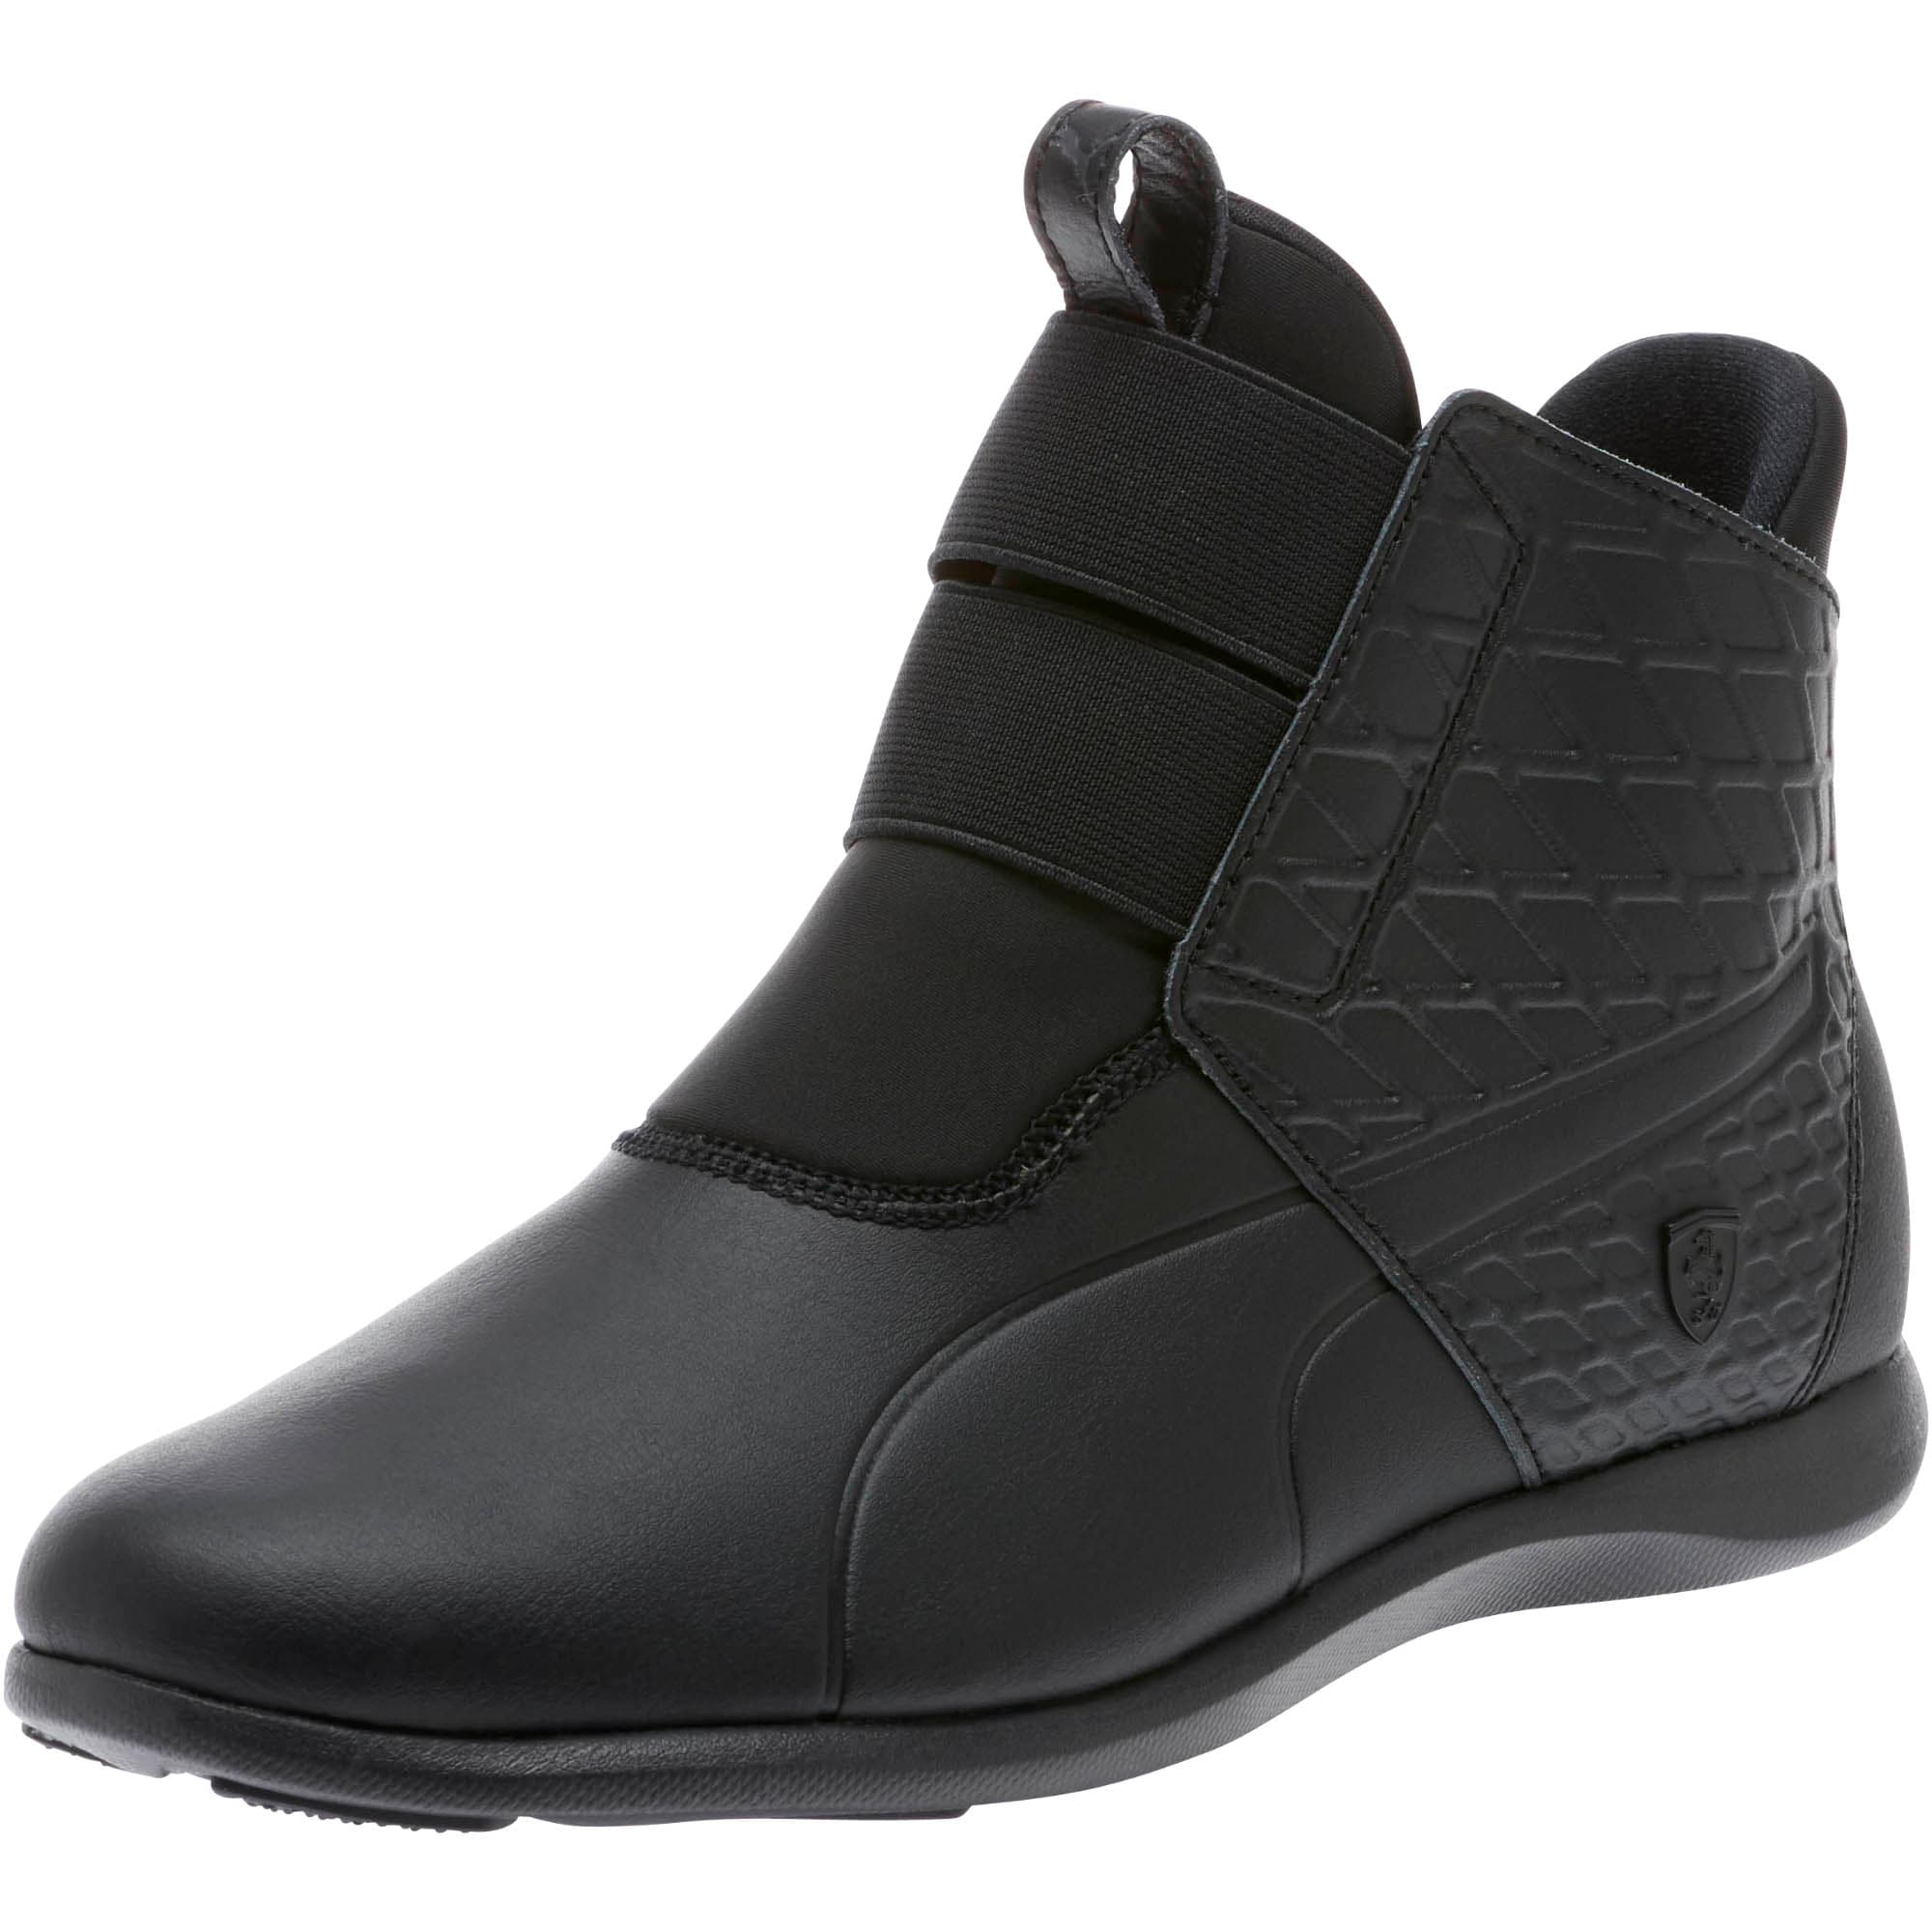 women's puma motorcycle boots